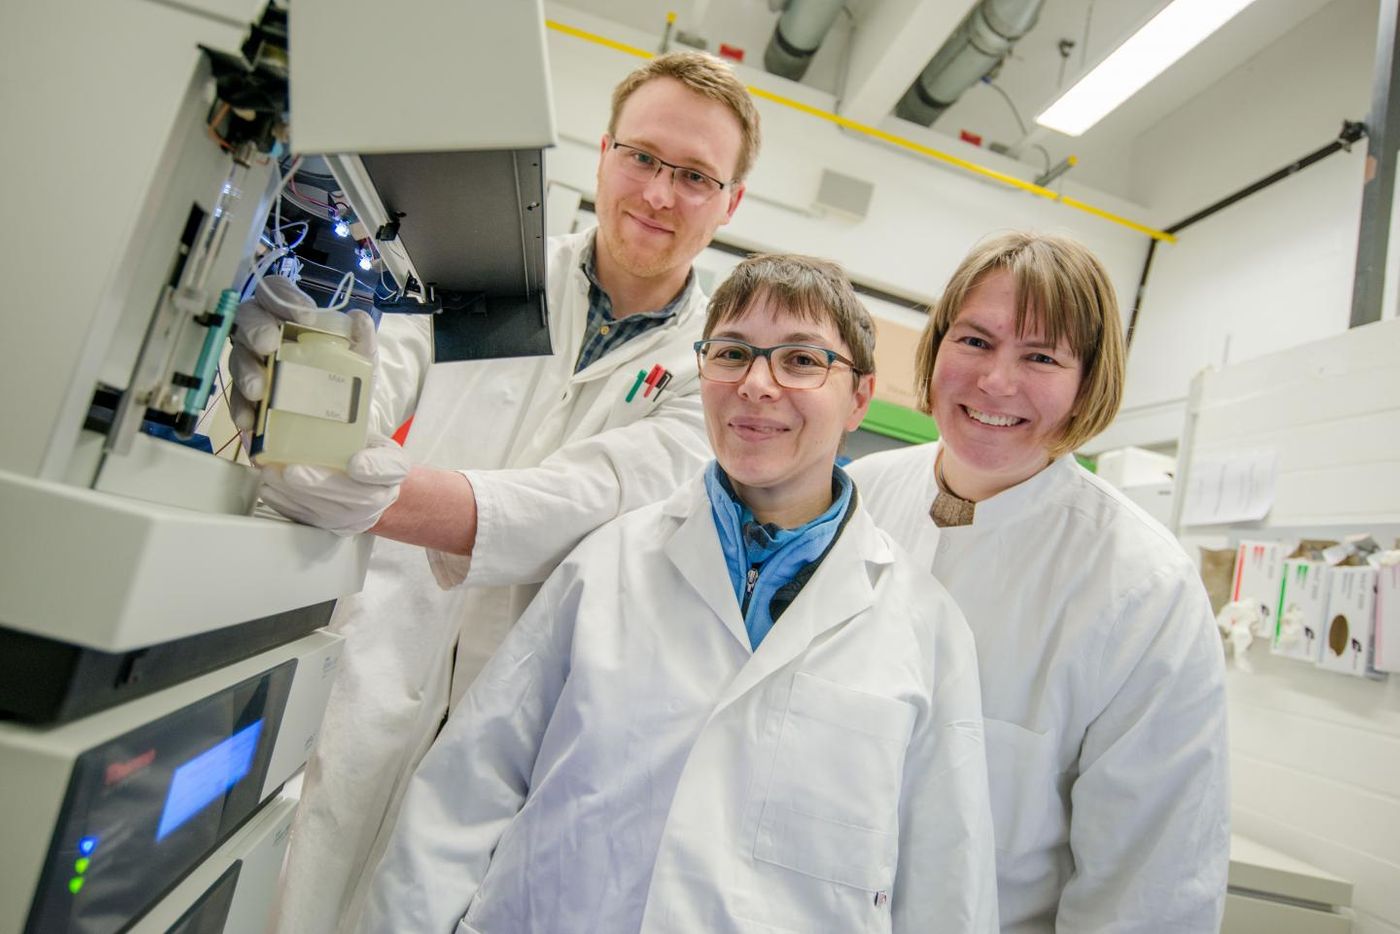 This is Christoph Senges, assistant professor Dr Minou Nowrousian and Prof Dr Julia Bandow at Ruhr-Universität Bochum (from left to right). / Copyright/Credit: RUB, Marquard